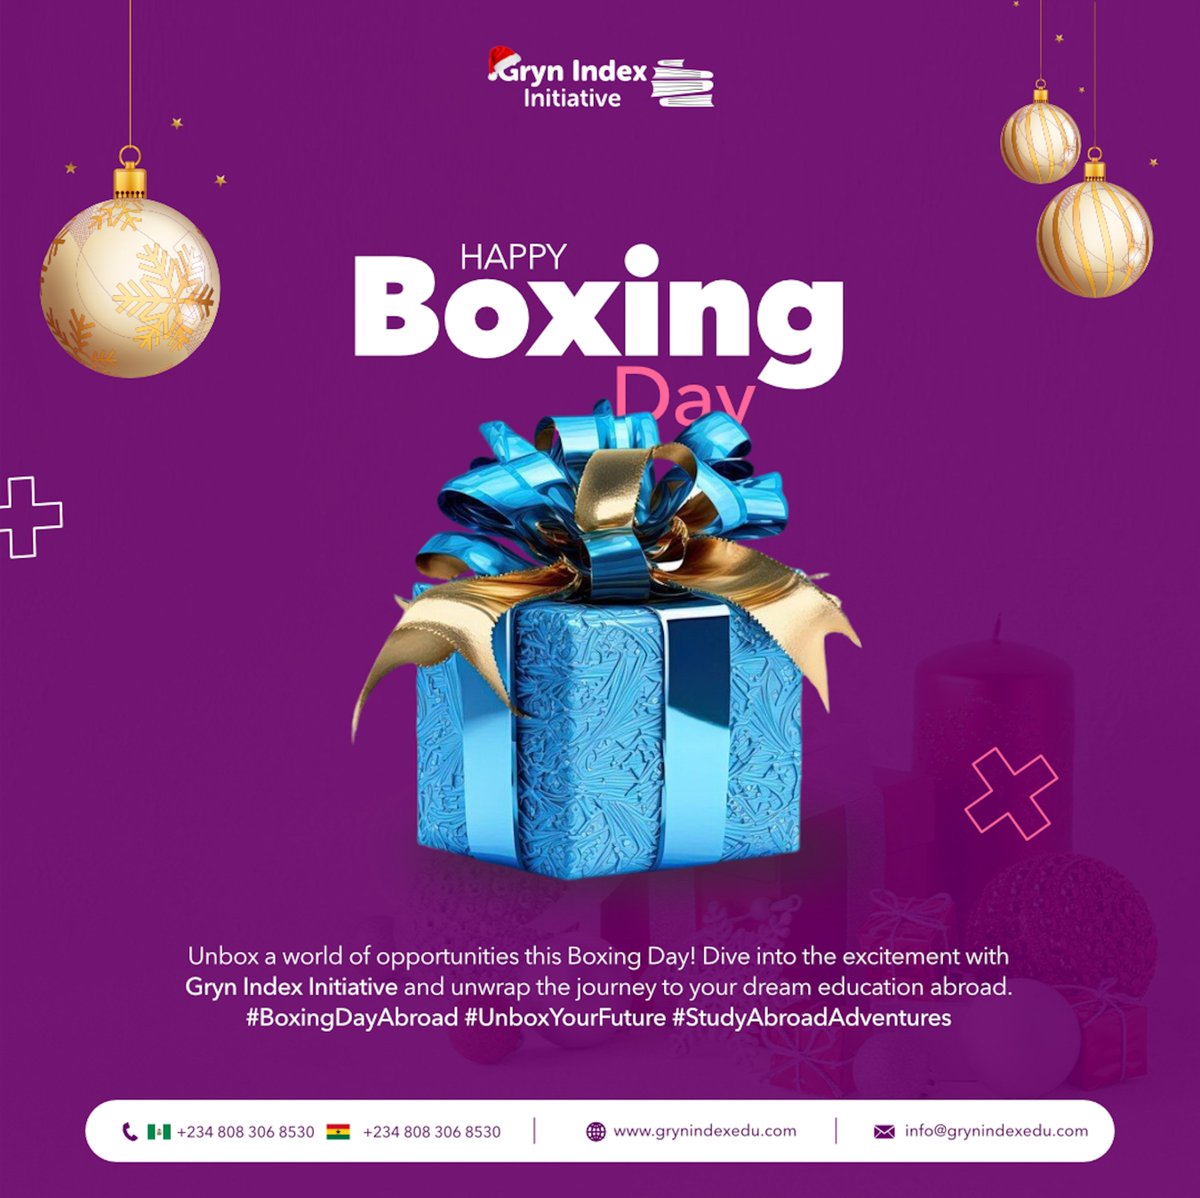 Unbox the adventure this Boxing Day! 🌍✈️ Embrace the thrill of studying abroad with Gryn Index Initiative.
Where every experience is a knockout journey waiting to unfold! 🥊 #BoxingDayAdventures #explorelearngrow